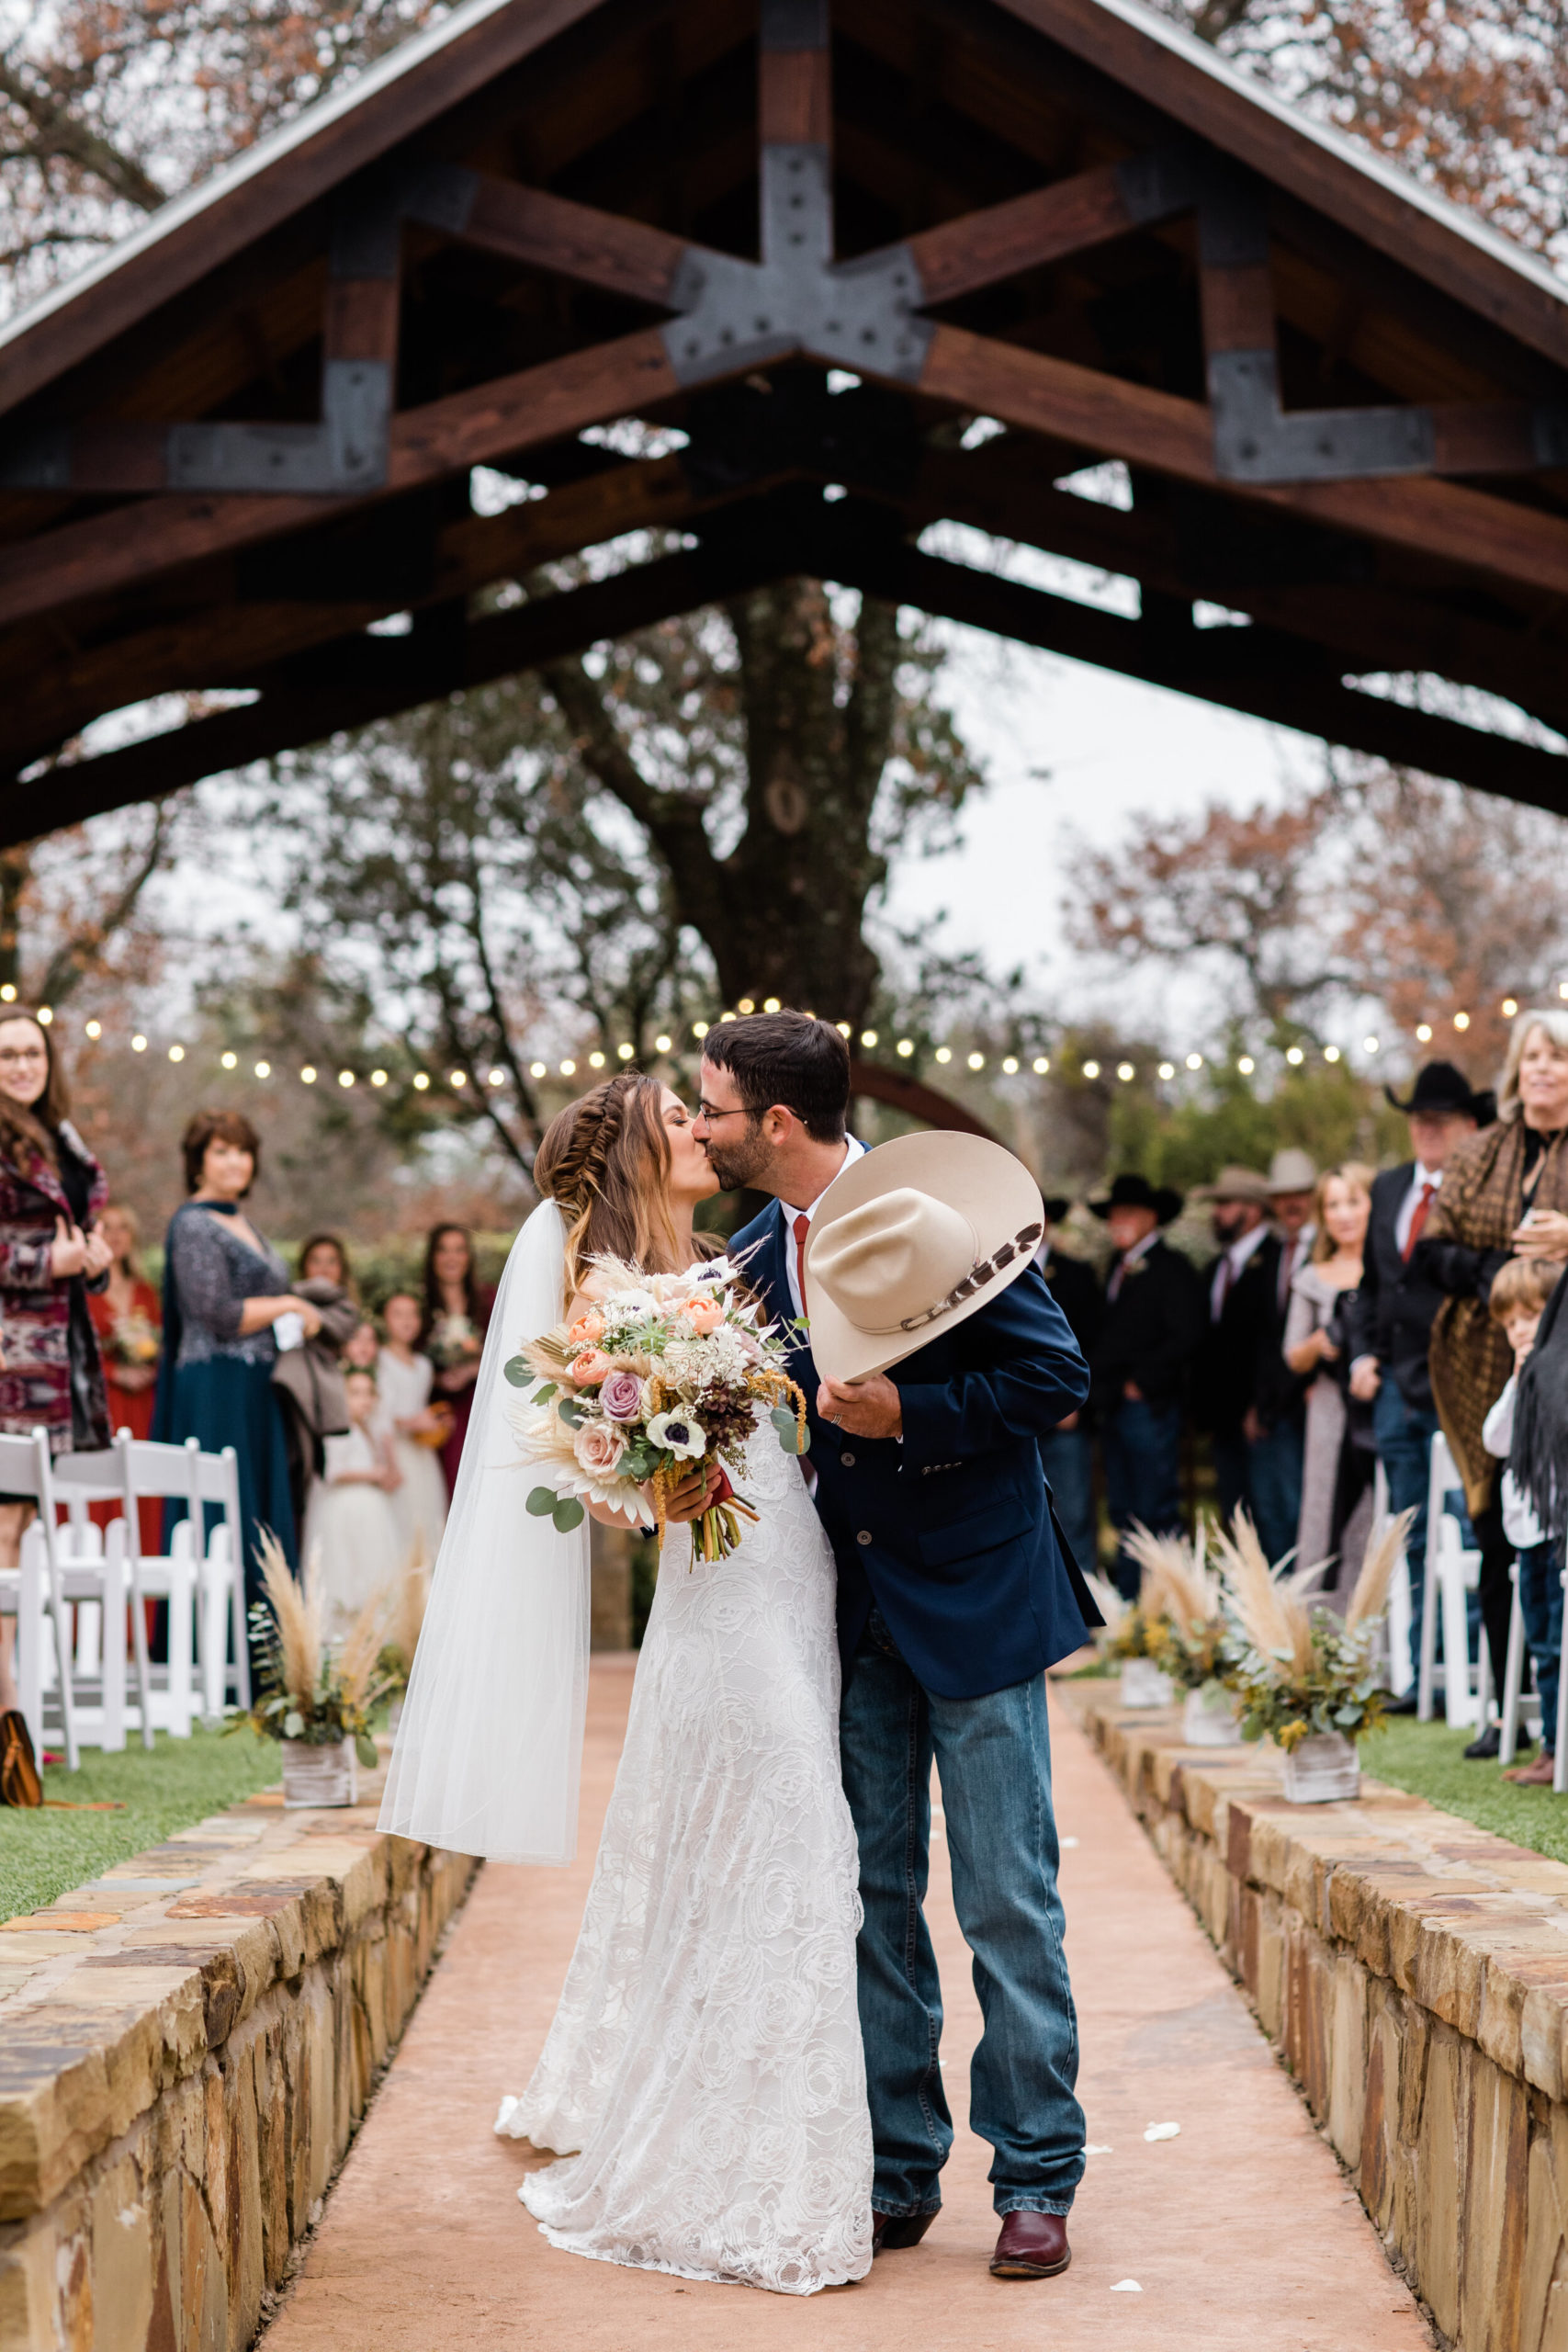 Heather + Parke Greeson at The Springs Event Venue at Weatherford, TX